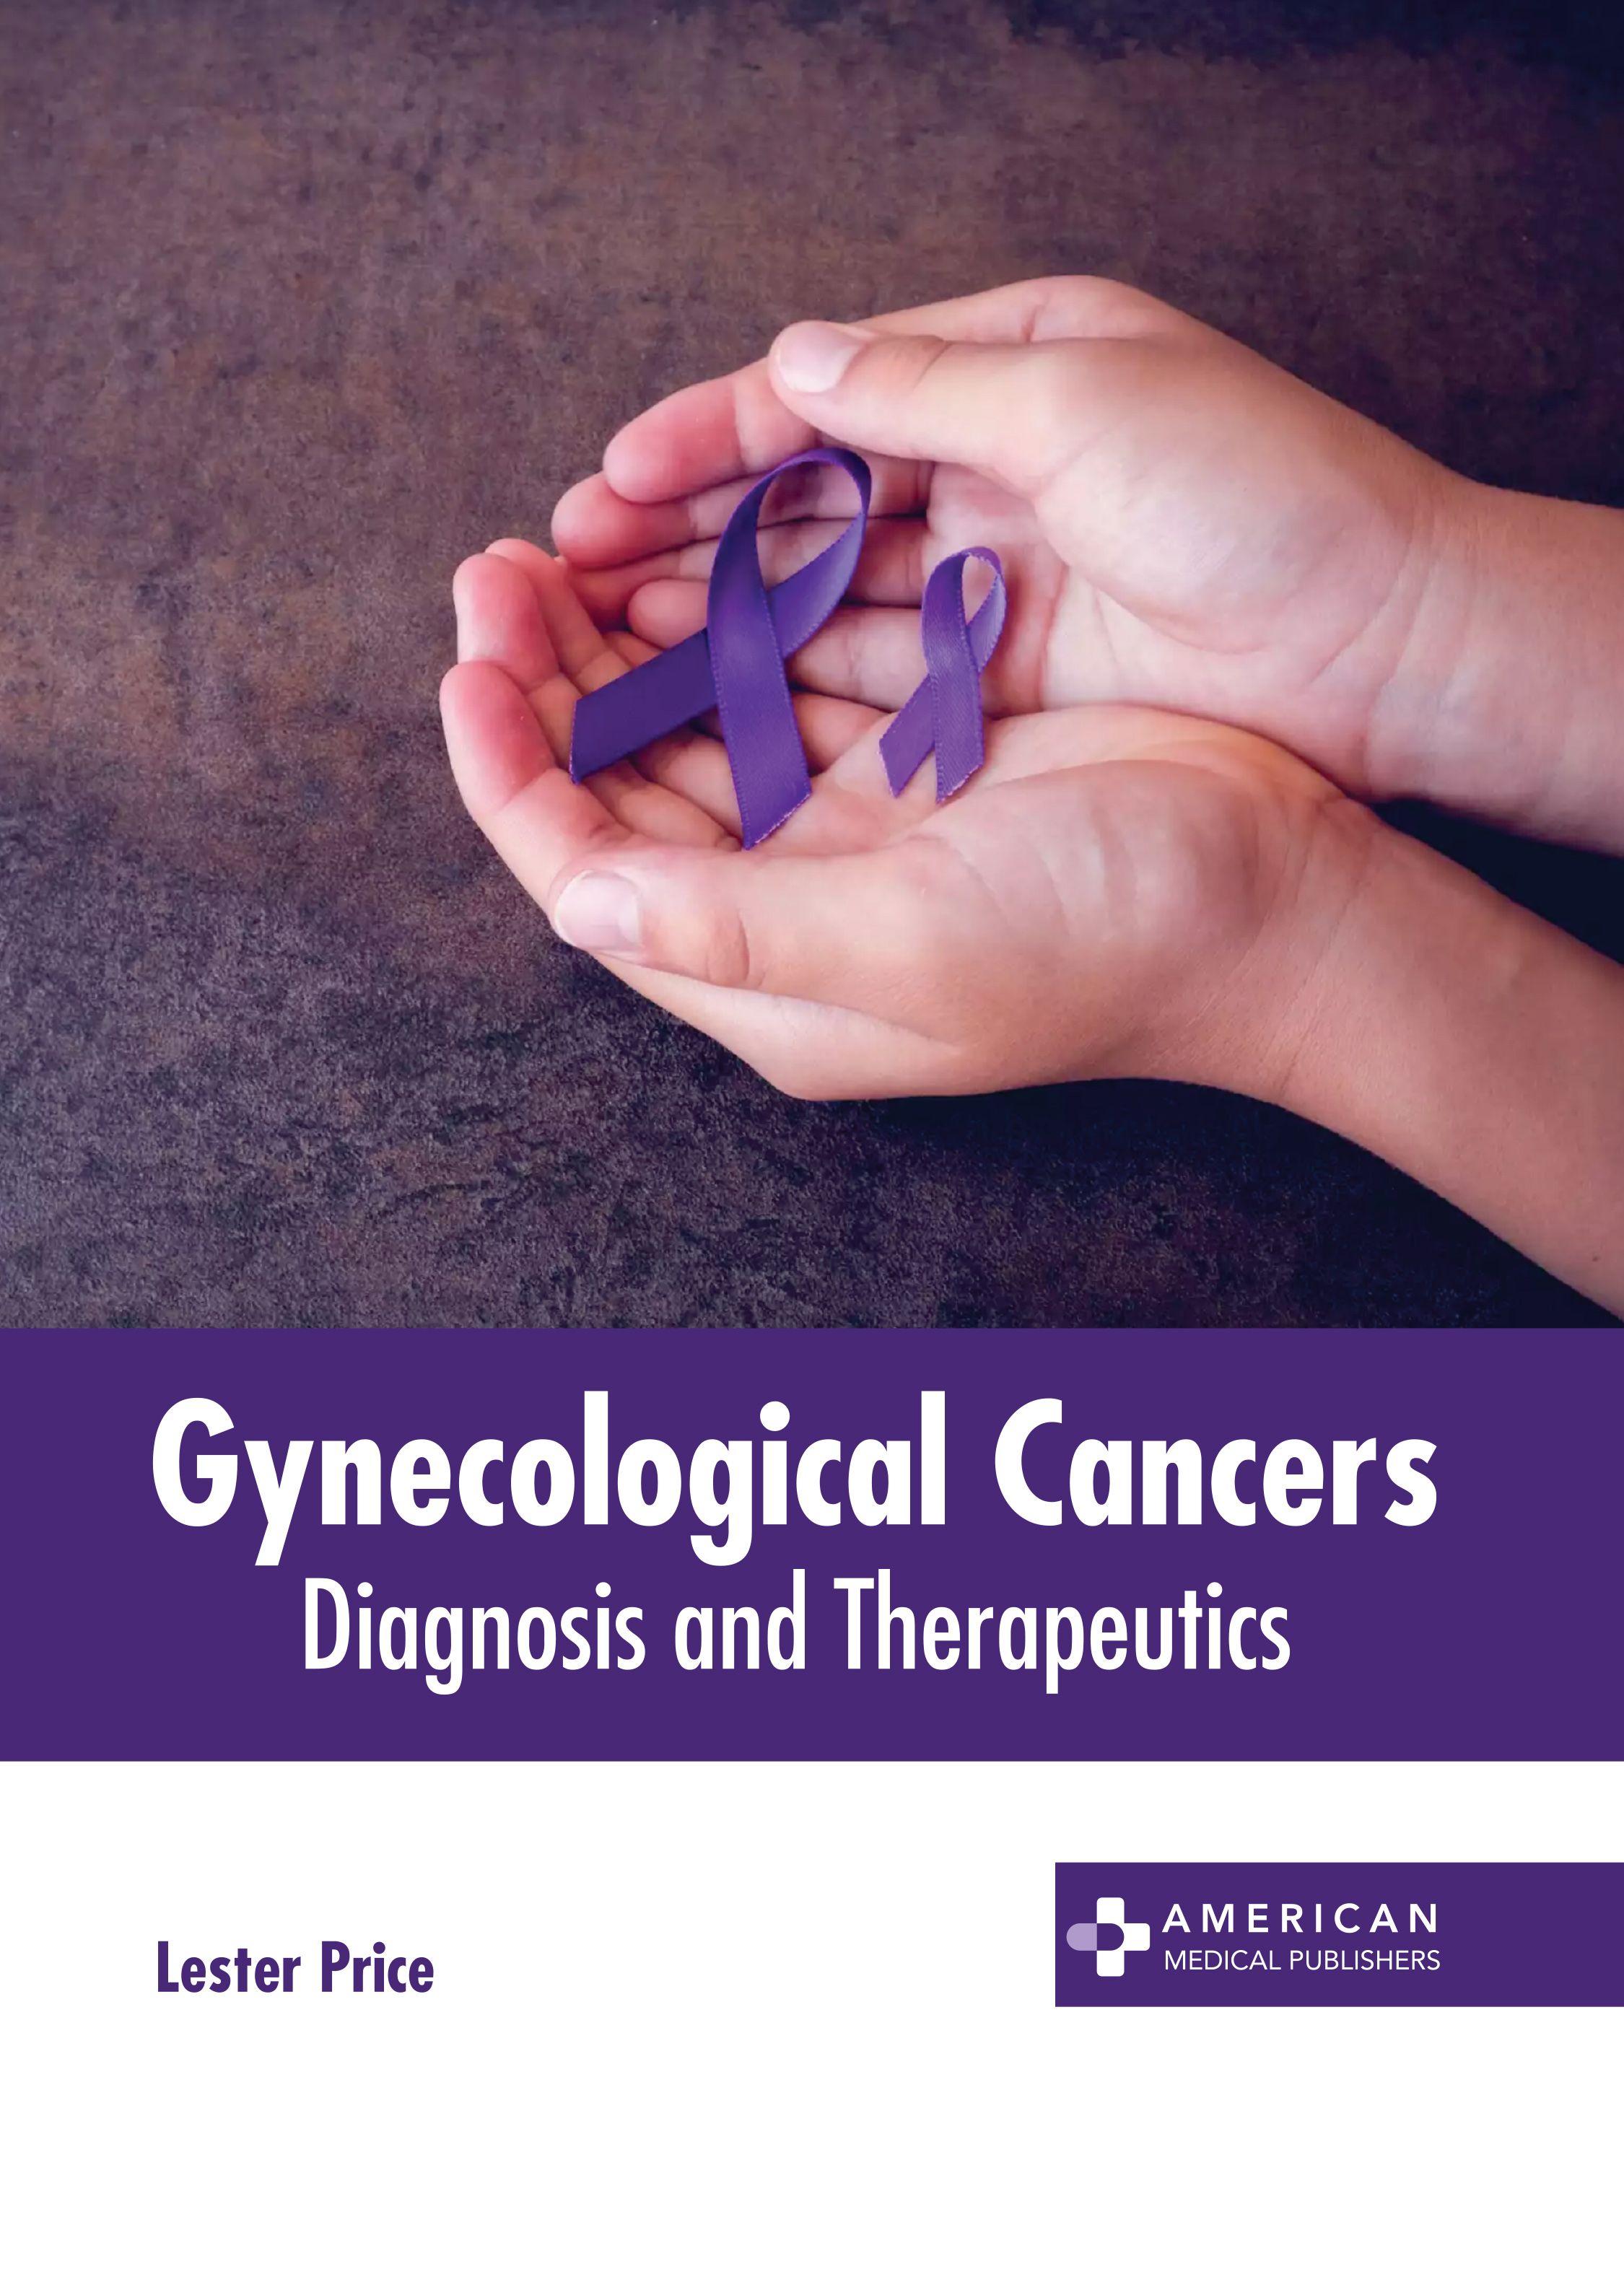 GYNECOLOGICAL CANCERS: DIAGNOSIS AND THERAPEUTICS